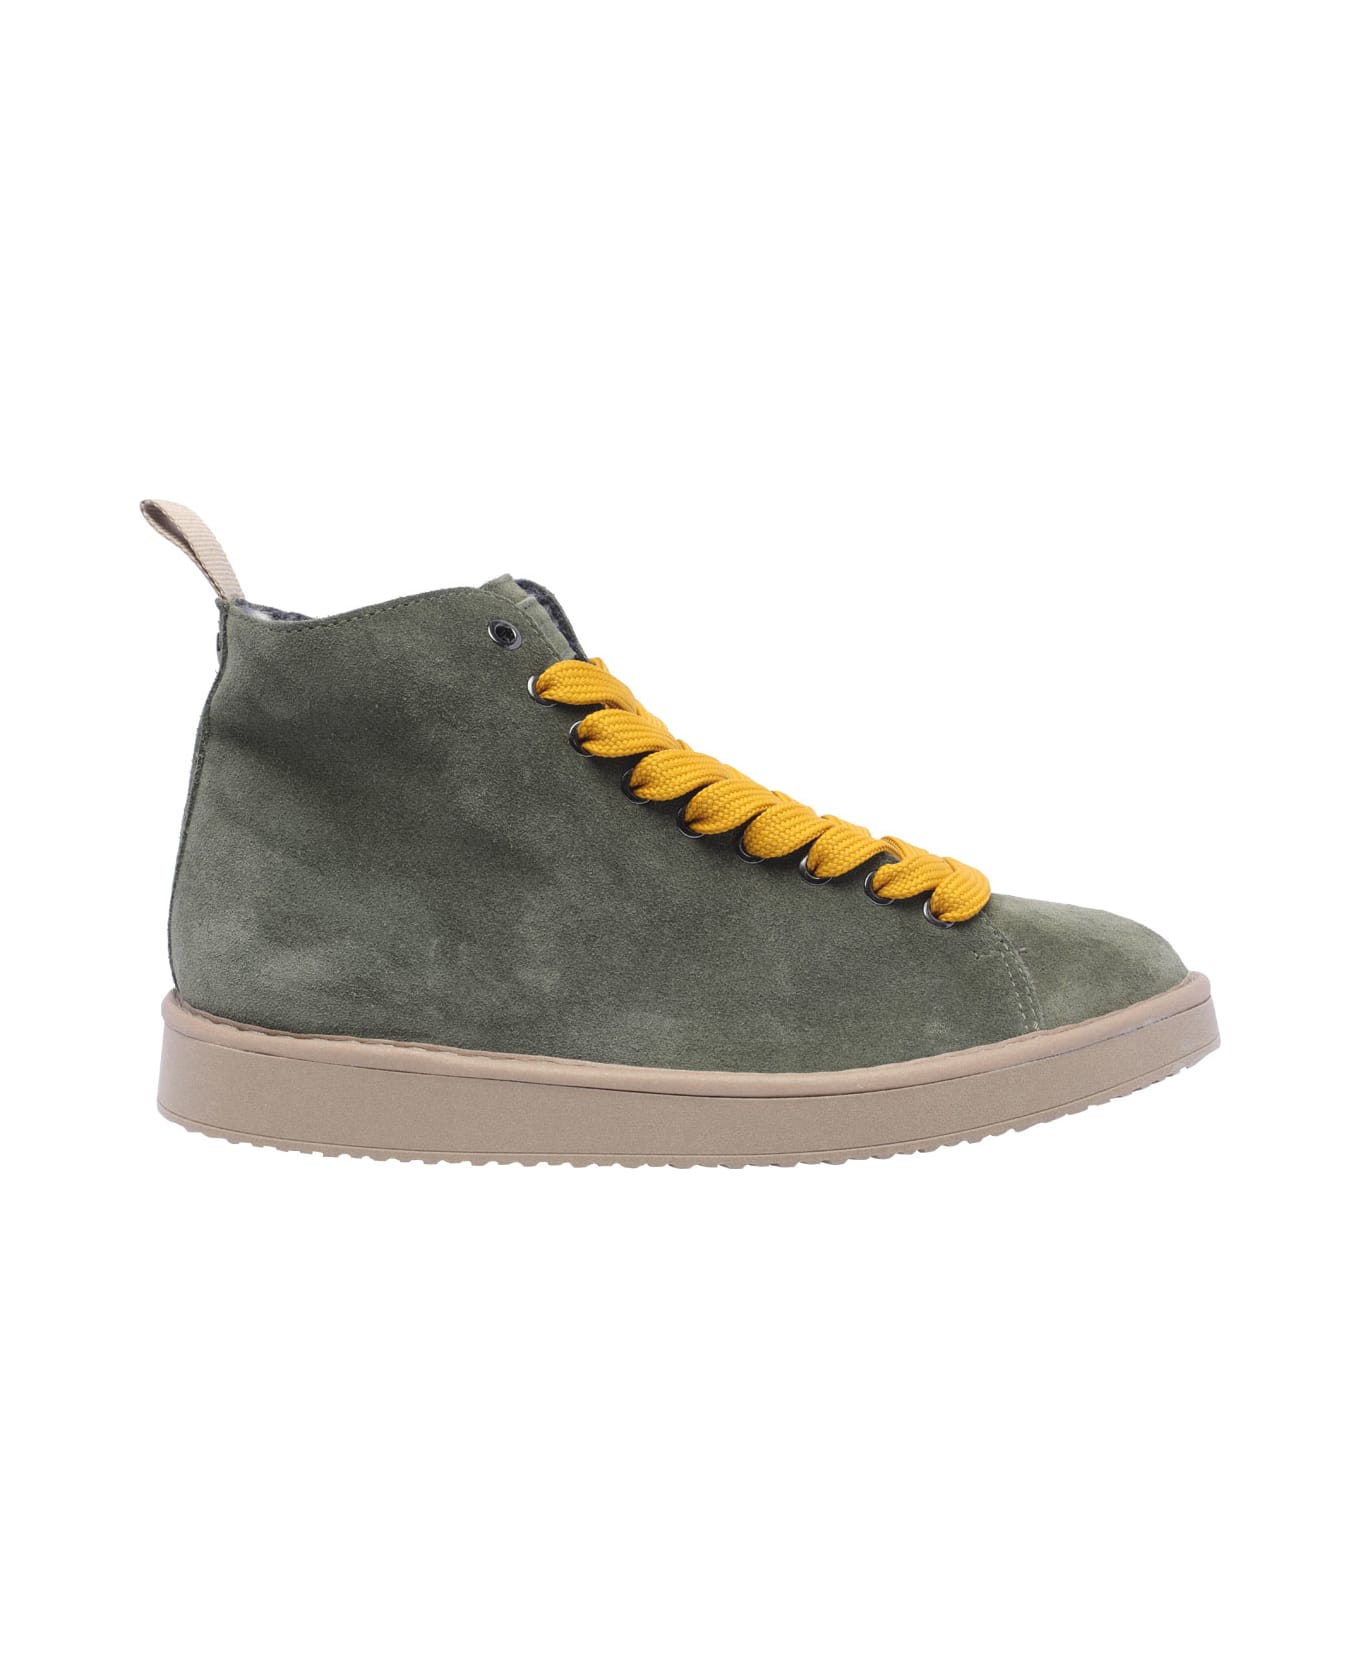 Panchic P01 Sneakers - Military Green Yellow スニーカー